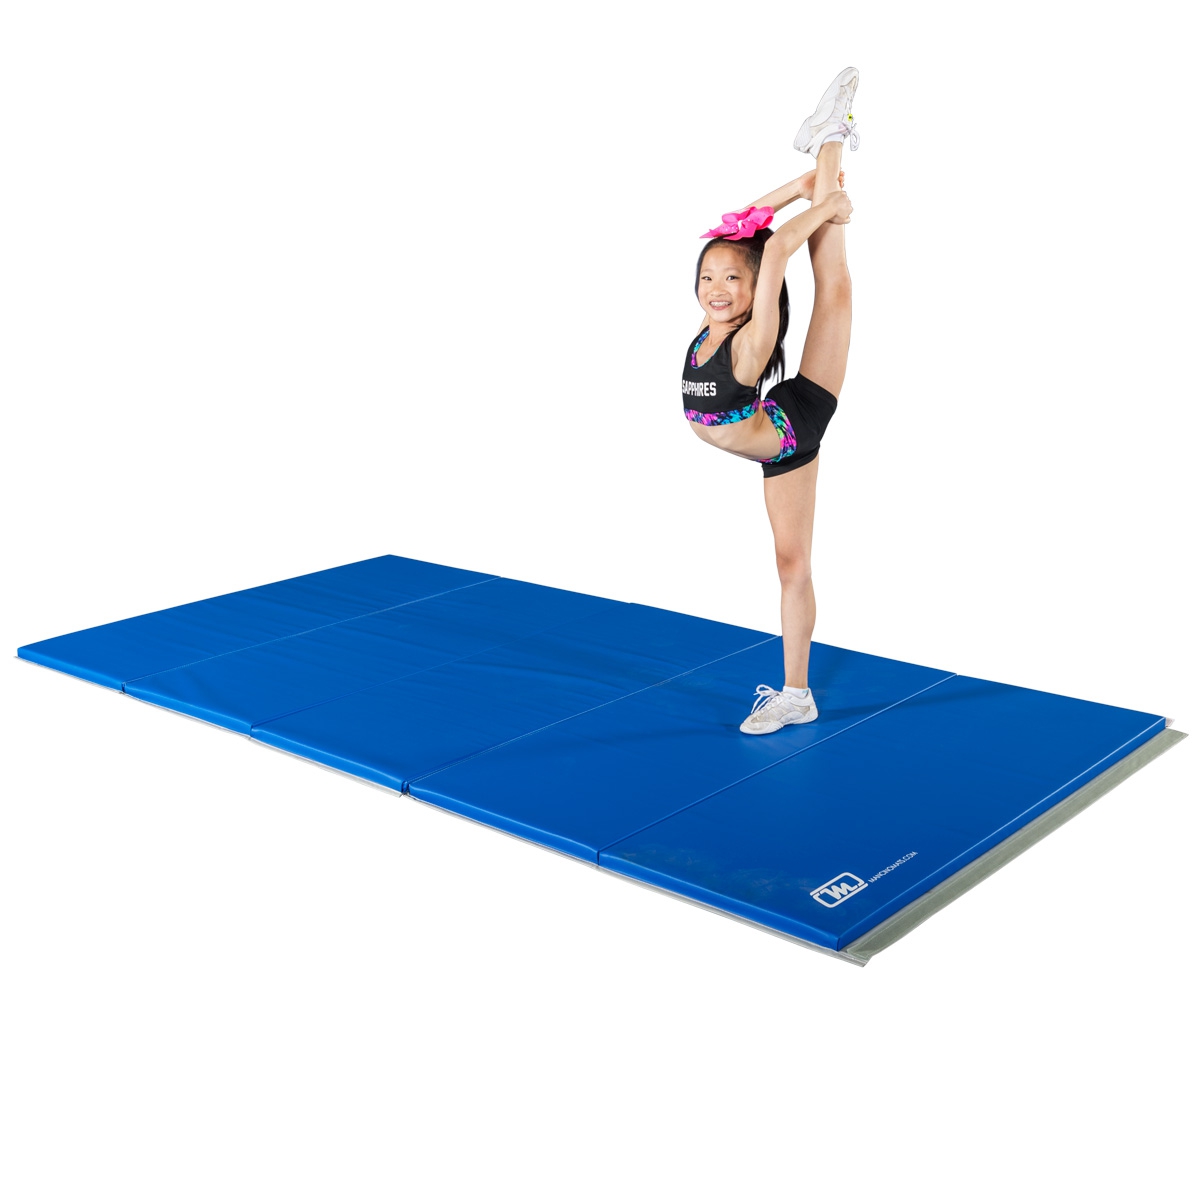 Our Gym Mats' Padding Foam and Filler Specifications